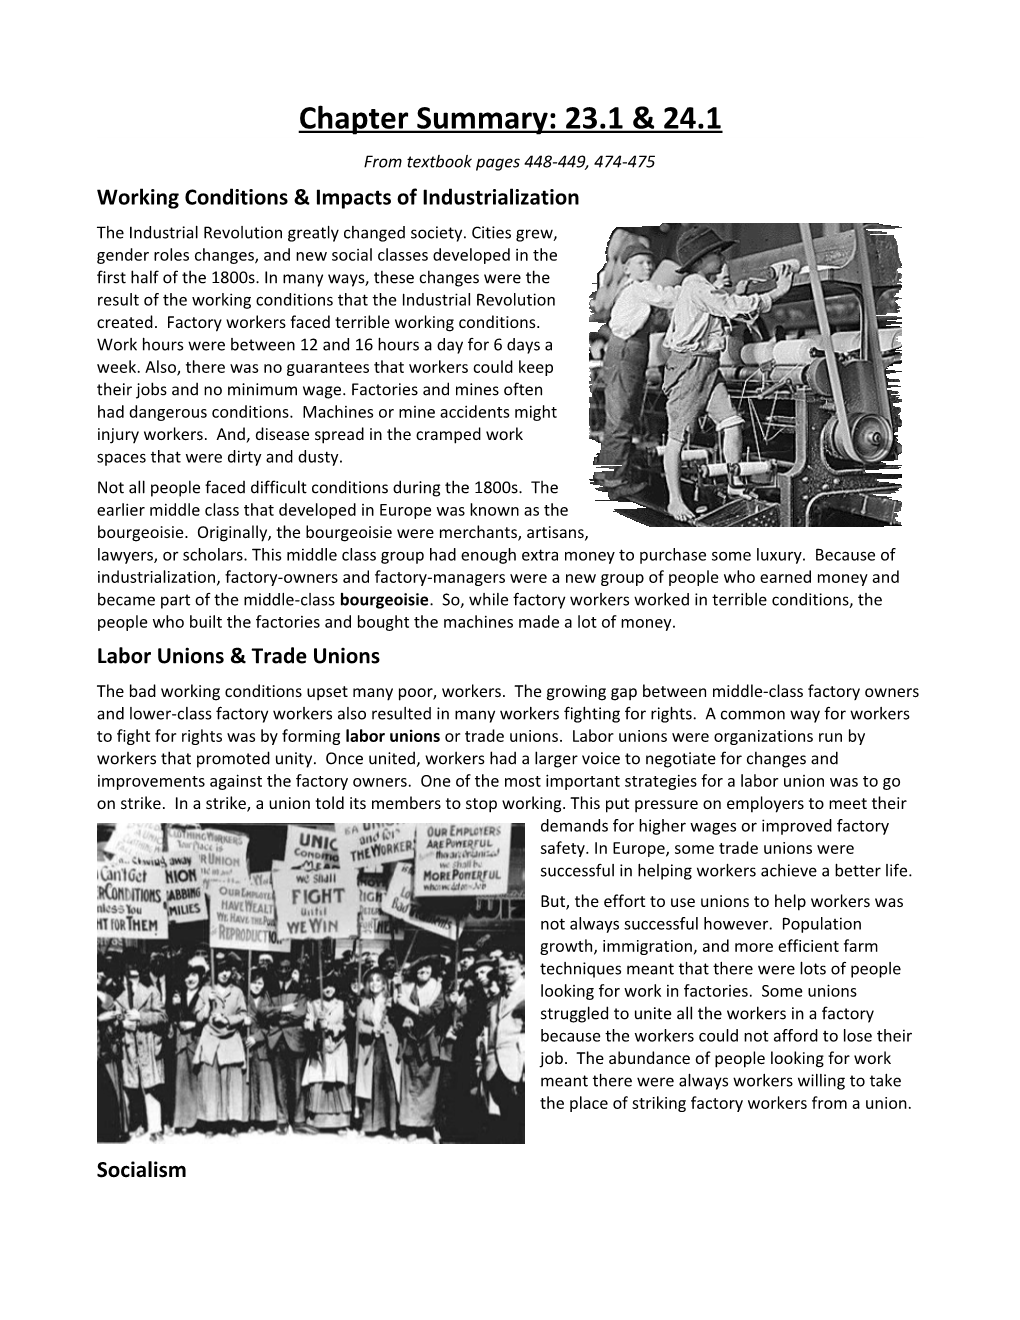 Working Conditions & Impacts of Industrialization